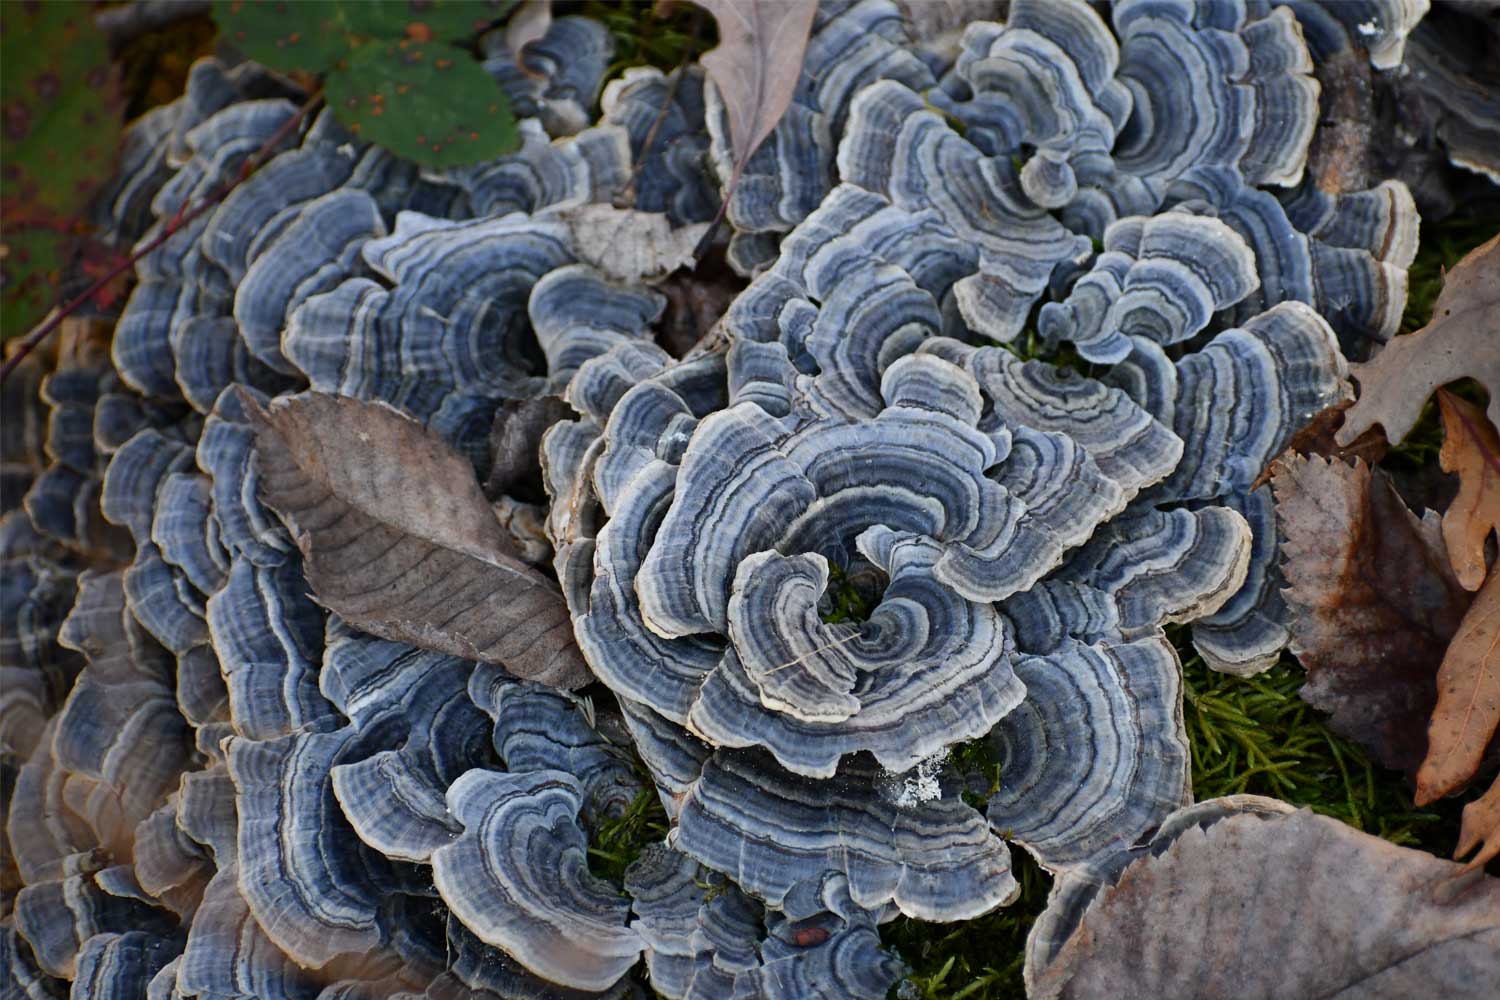 Turkey tail fungus among moss and leaves.